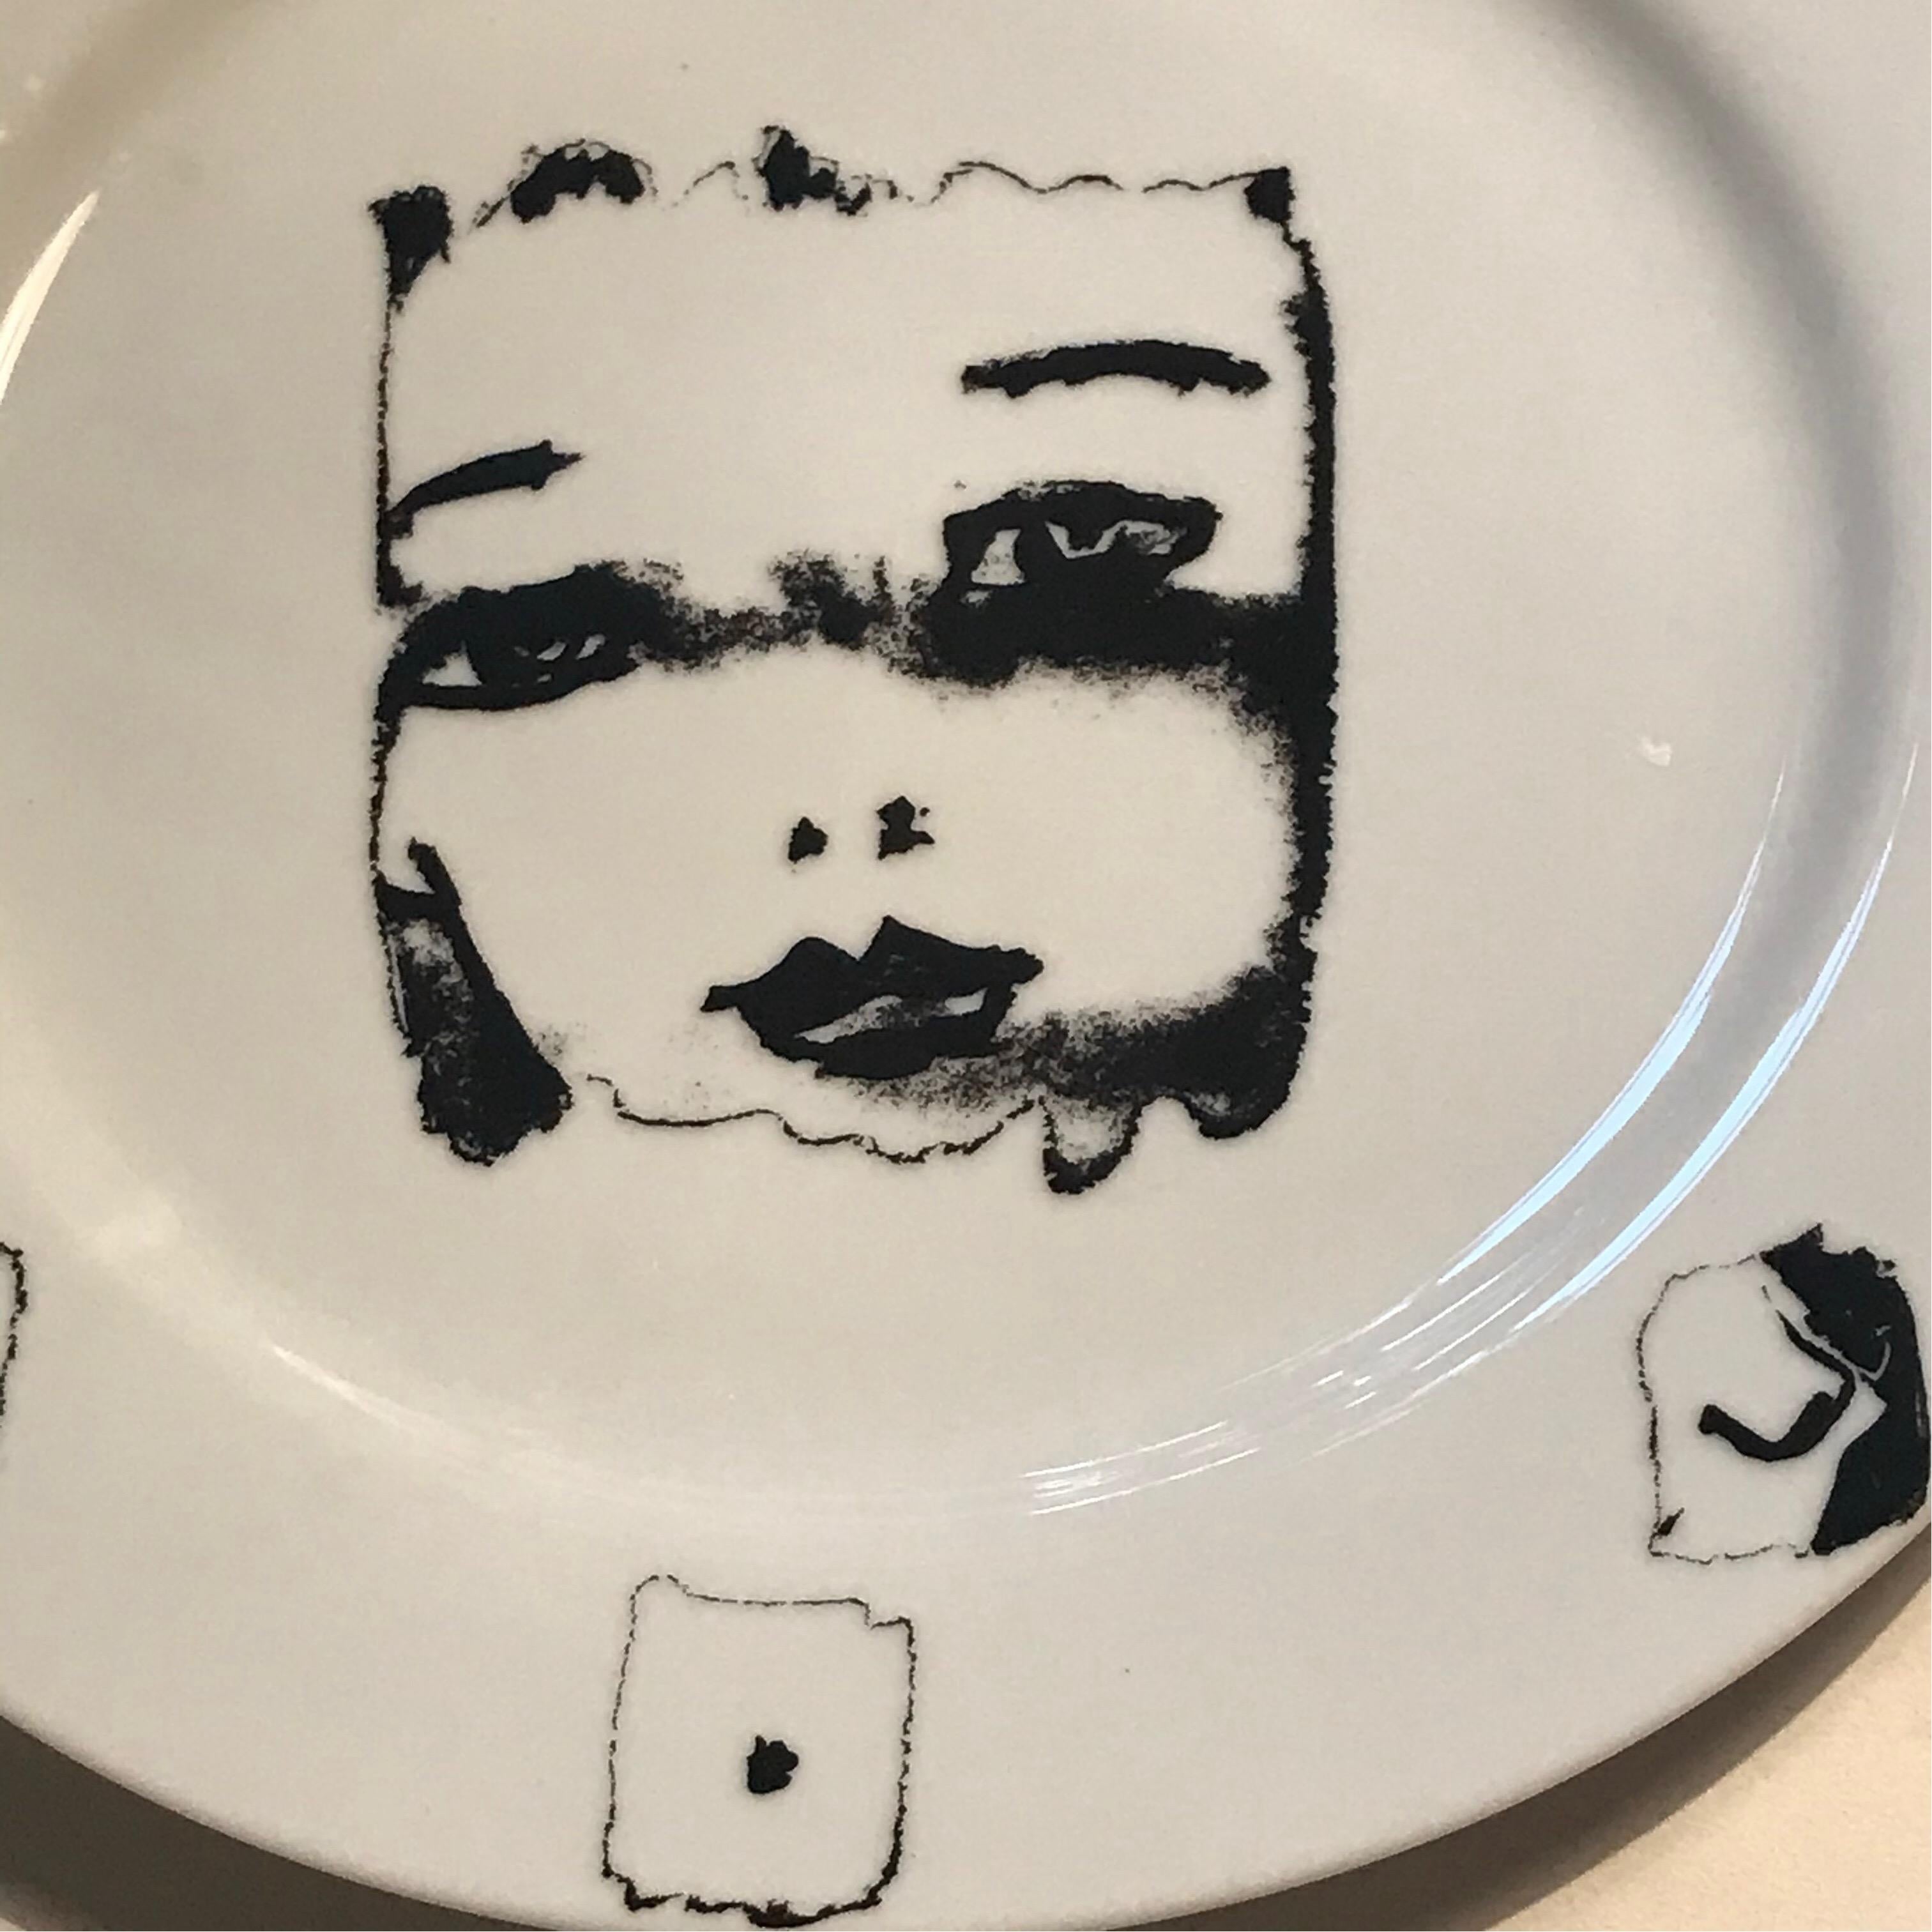 Ceramic plate designed by artist KimMcCarty, produced on the occasion of the Santa Monica Museum of Art’s 20th anniversary.

Kim McCarty Santa Monica Museum of Art 20th Anniversary artist plate ceramic 12 x 12 in. (30.48 x 30.48 cm.) Edition of